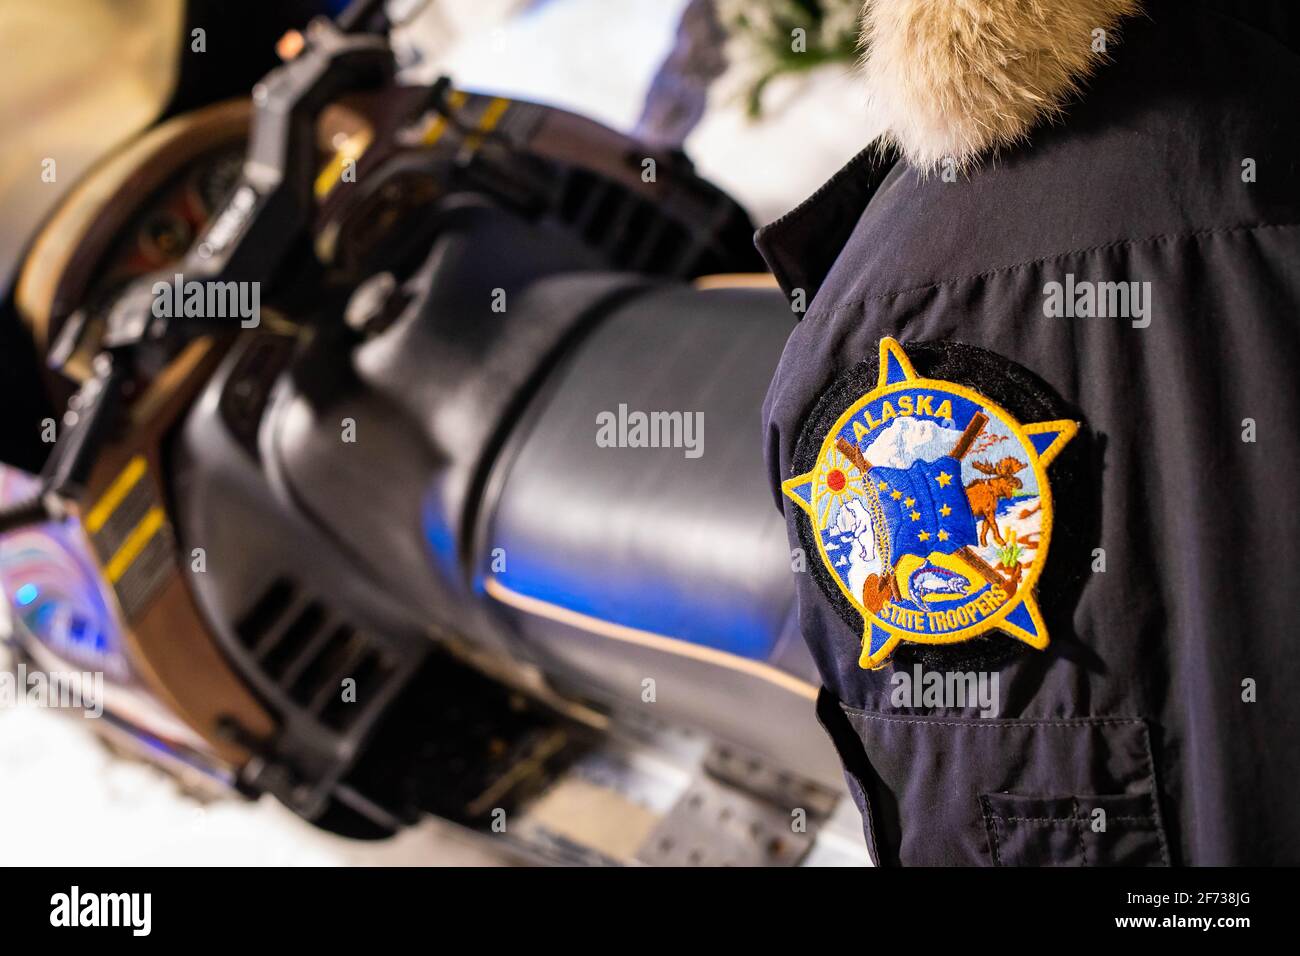 Alaska state trooper official batch icon on clothes close up Stock Photo